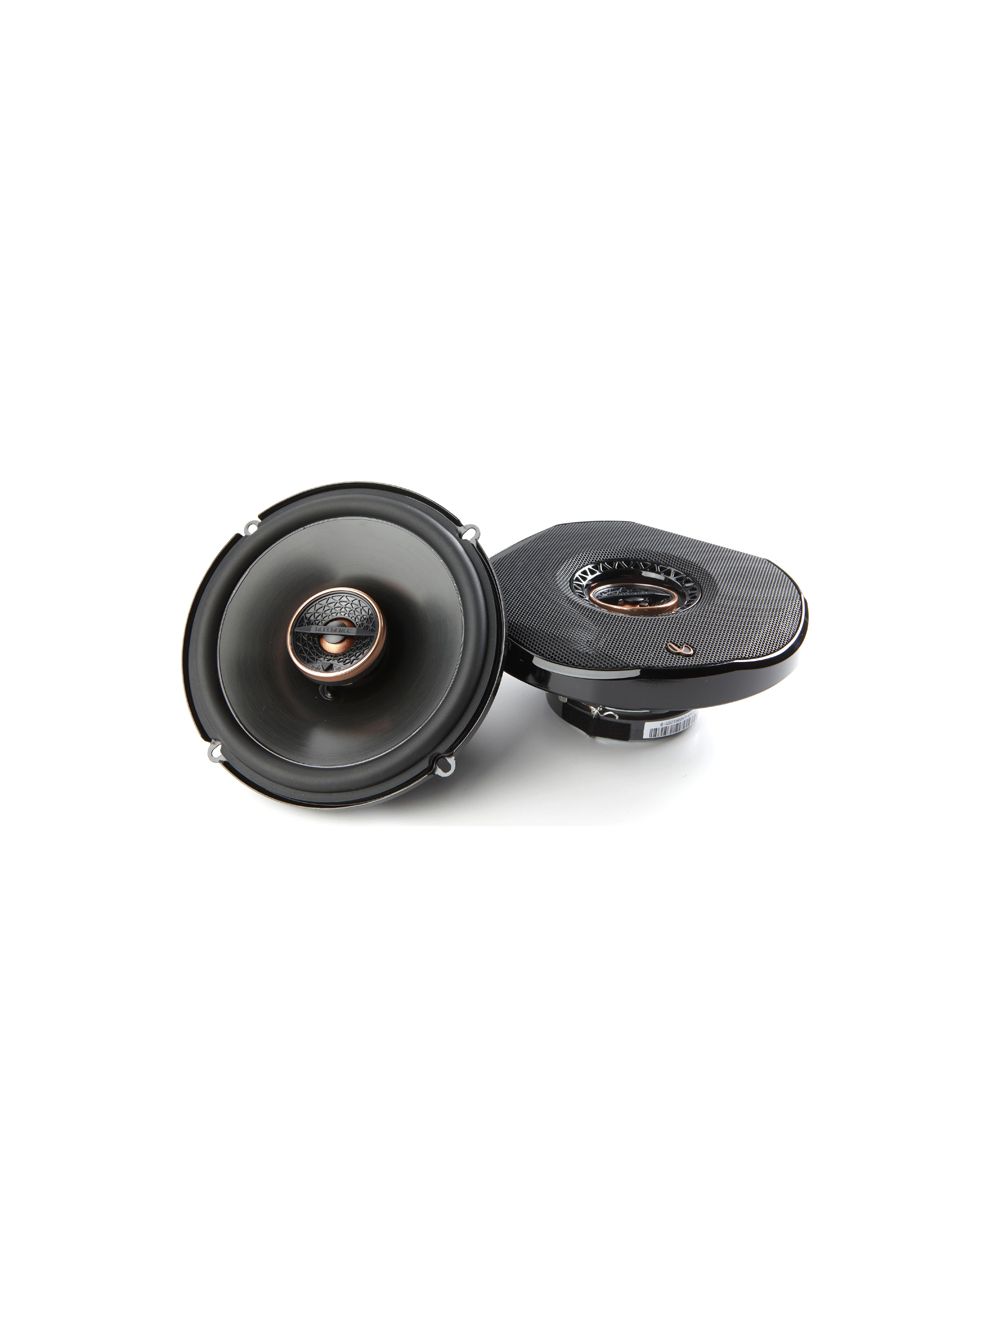 Car Speaker Size Replacement fits 2017-2020 for Nissan Titan or Titan XD (not amplified)